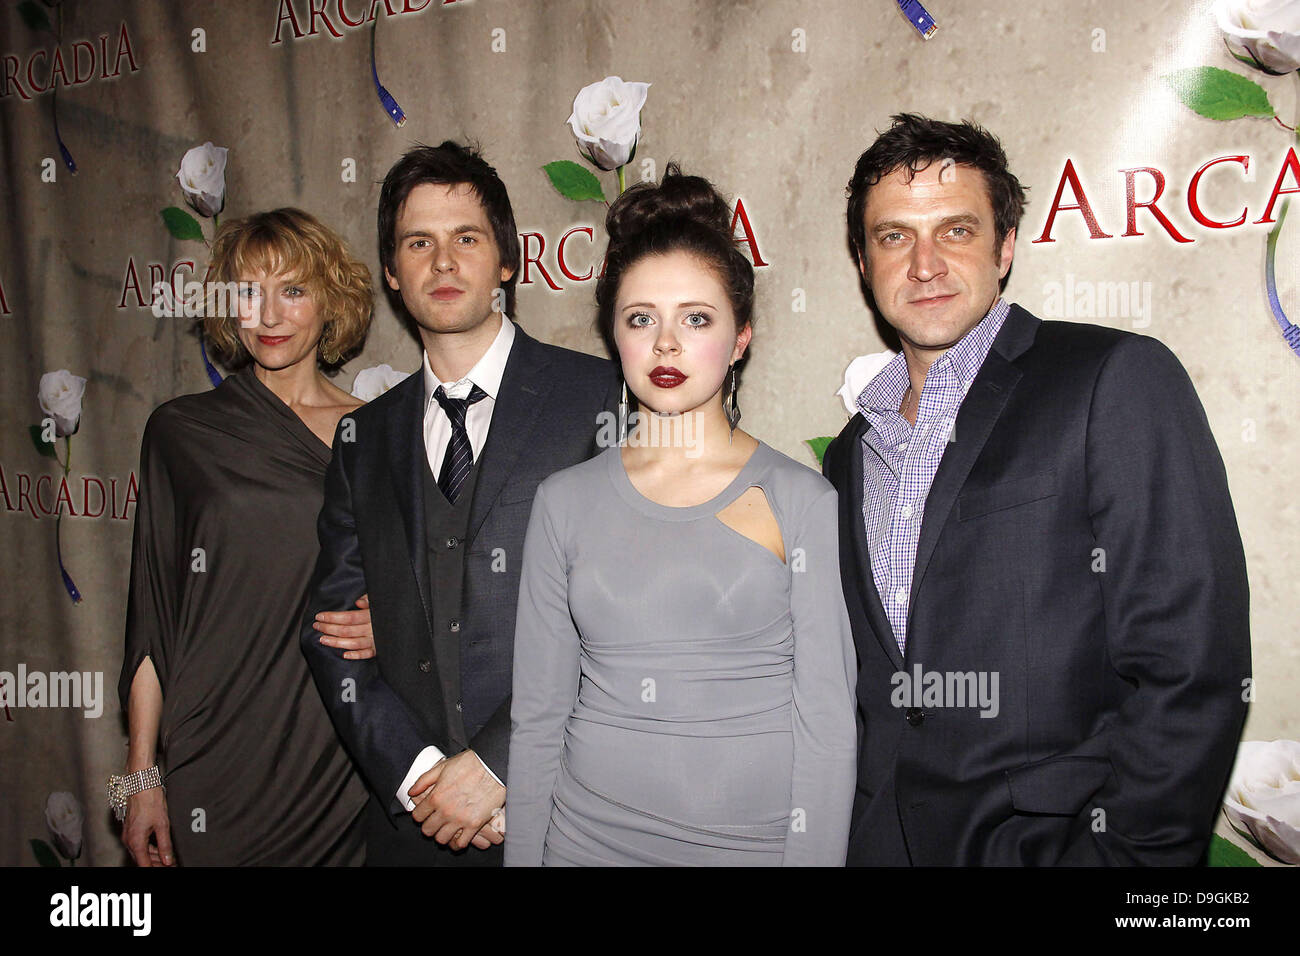 Lia Williams, Tom Riley, Bel Powley and Raul Esparza  Opening night after party for the Broadway production of 'Tom Stoppard's Arcadia' held at Gotham Hall. New York City, USA - 17.03.11 Stock Photo